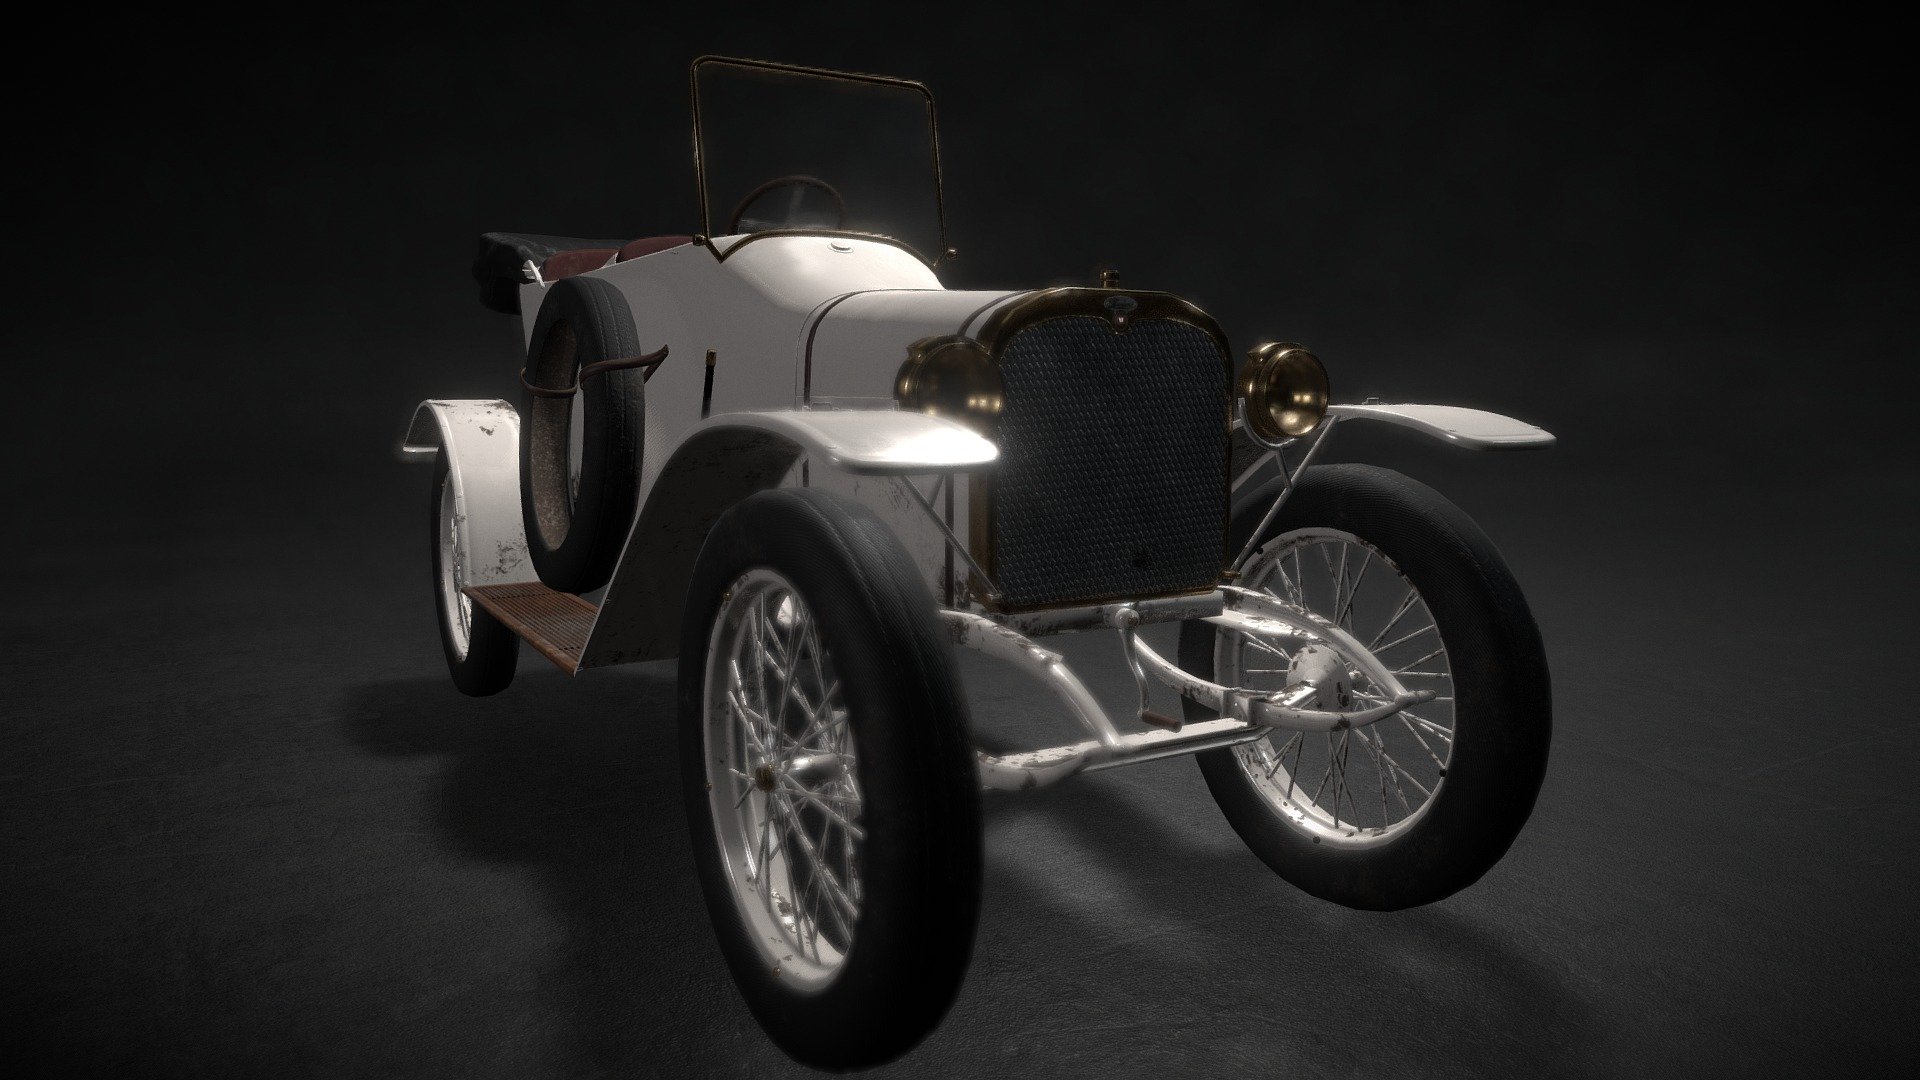 In my spare time I decided to model an old vehicle from Germany from before WW1. The Wanderer W1 looked like a very fun project and a nice car as well. 

&ldquo;The Wanderer Puppchen was a small passenger car introduced by the Chemnitz based Wanderer automotive company in 1911. It went on sale the following year. The car was delivered as an open topped tourer with two seats positioned one behind the other. There were two doors, also one behind the other, and both on the left-hand side of the car.